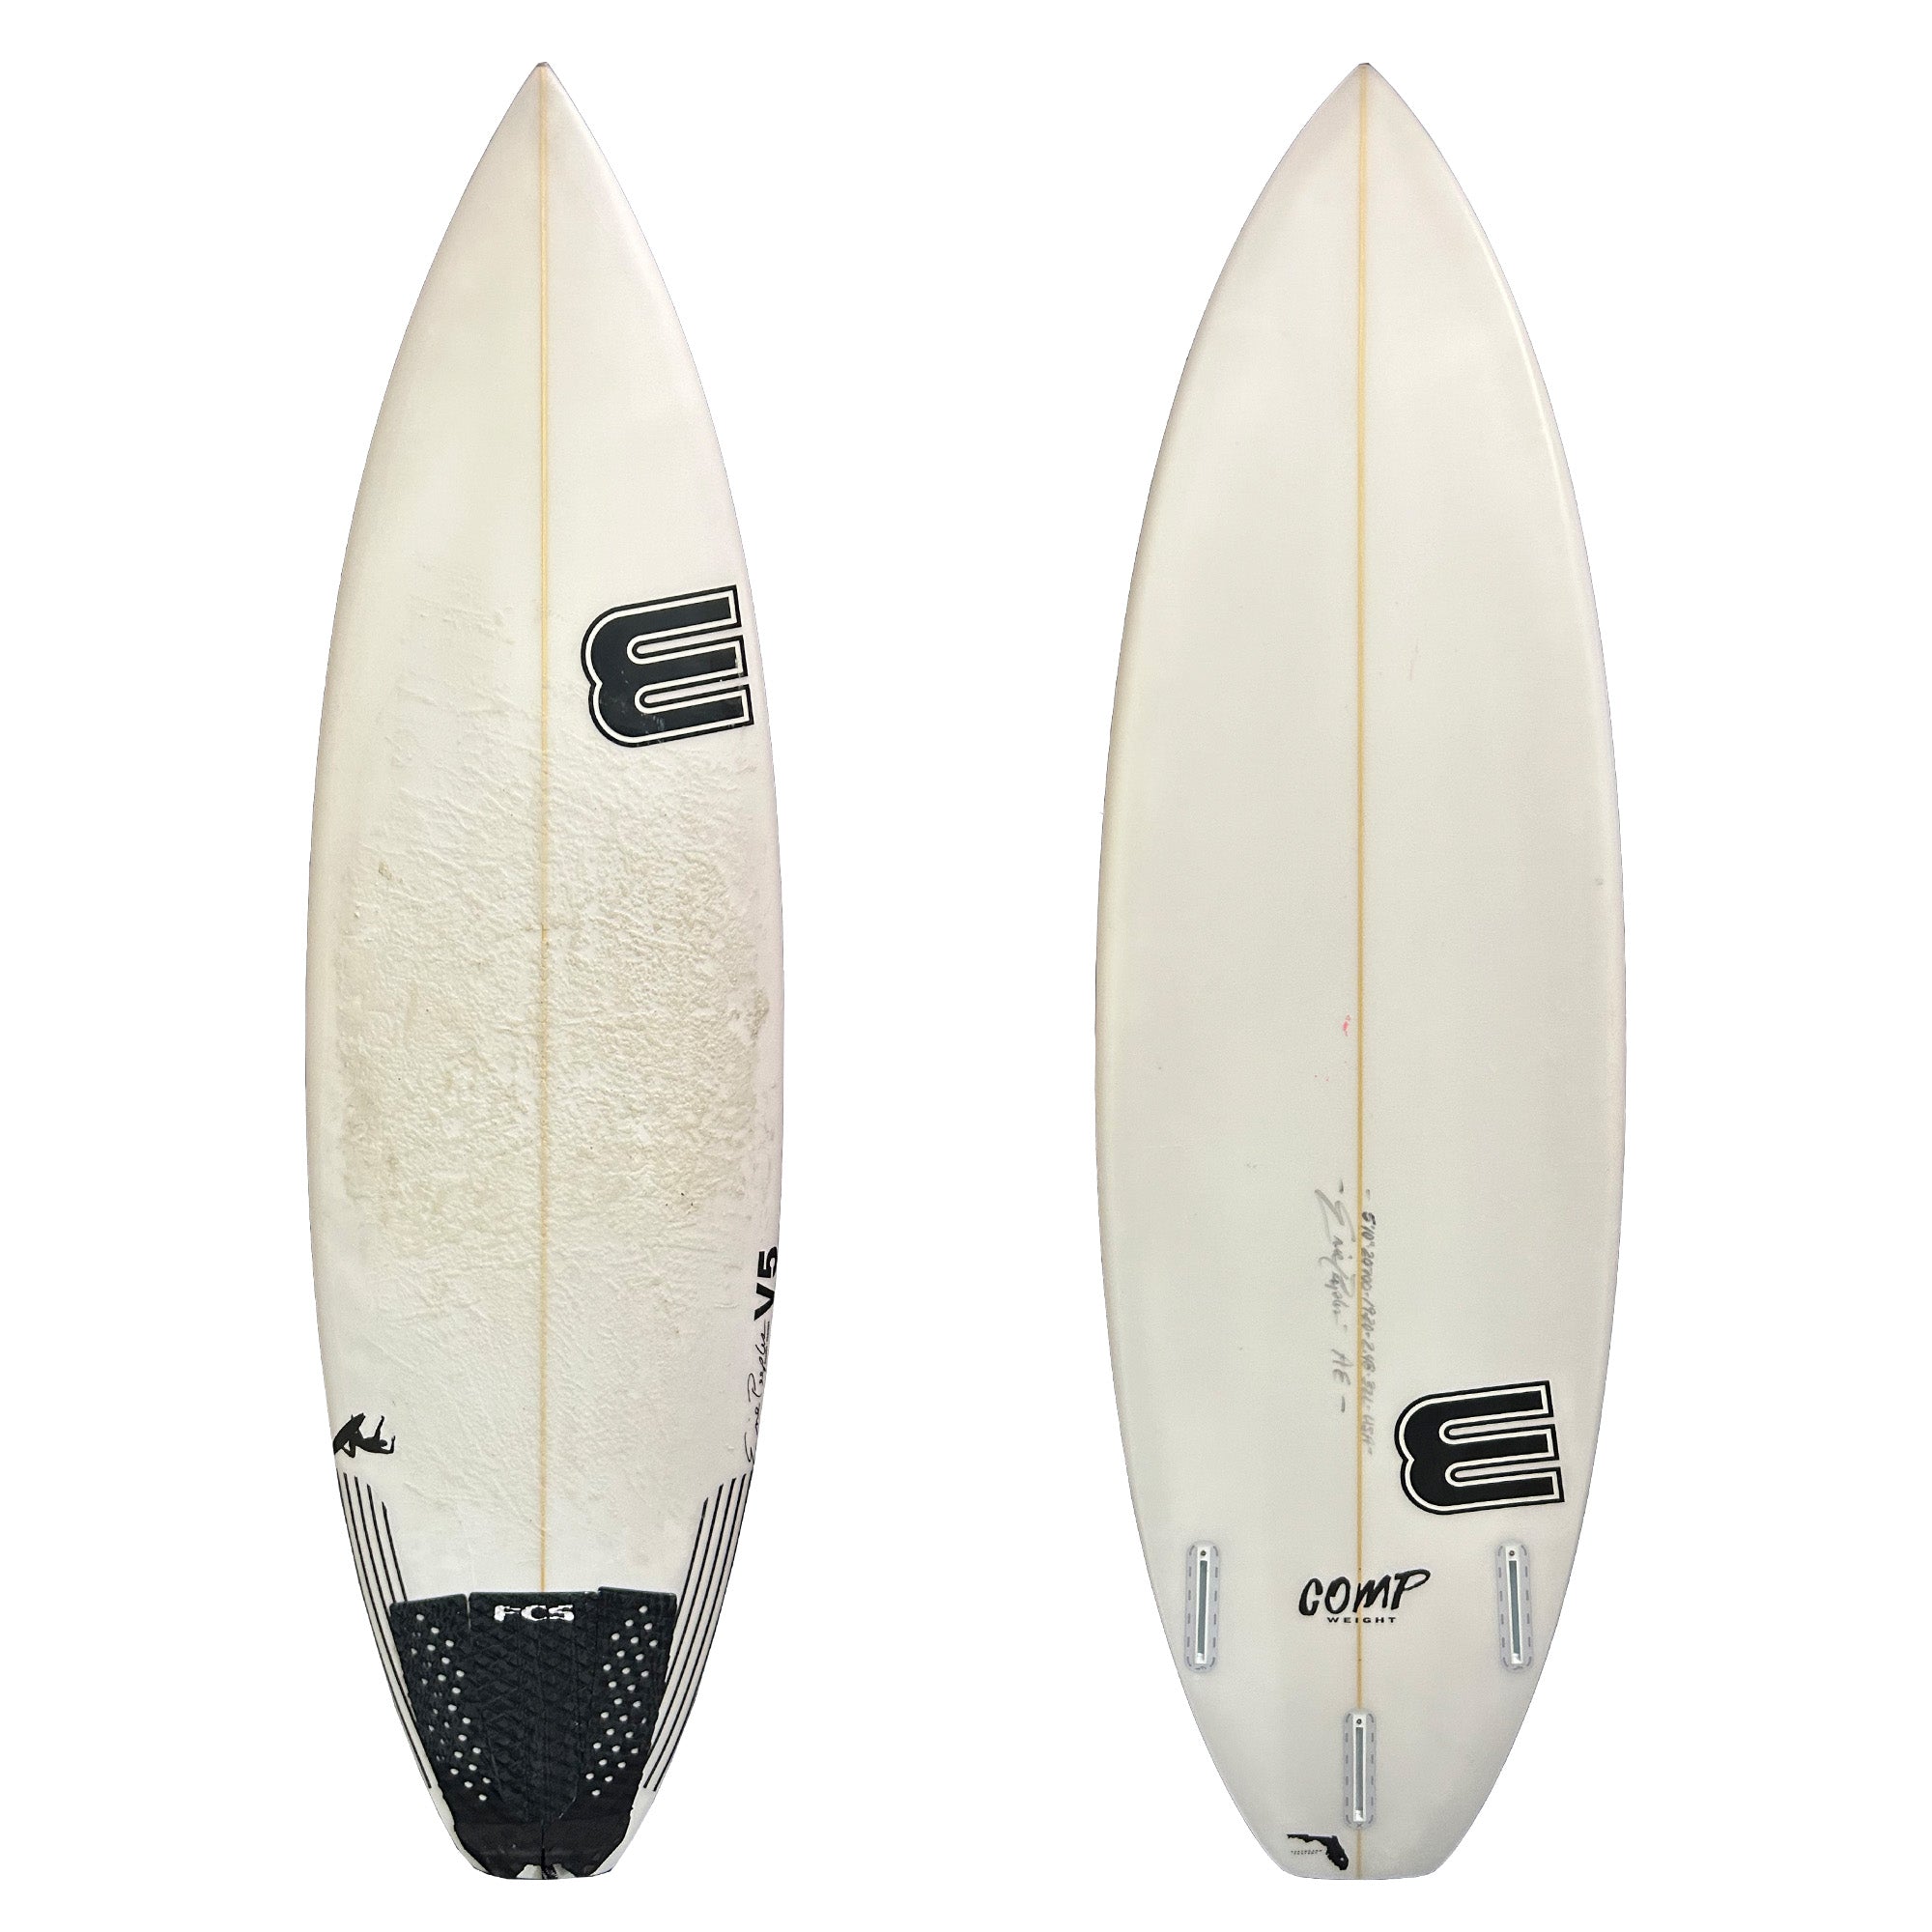 Erie 5'10 Used Surfboard